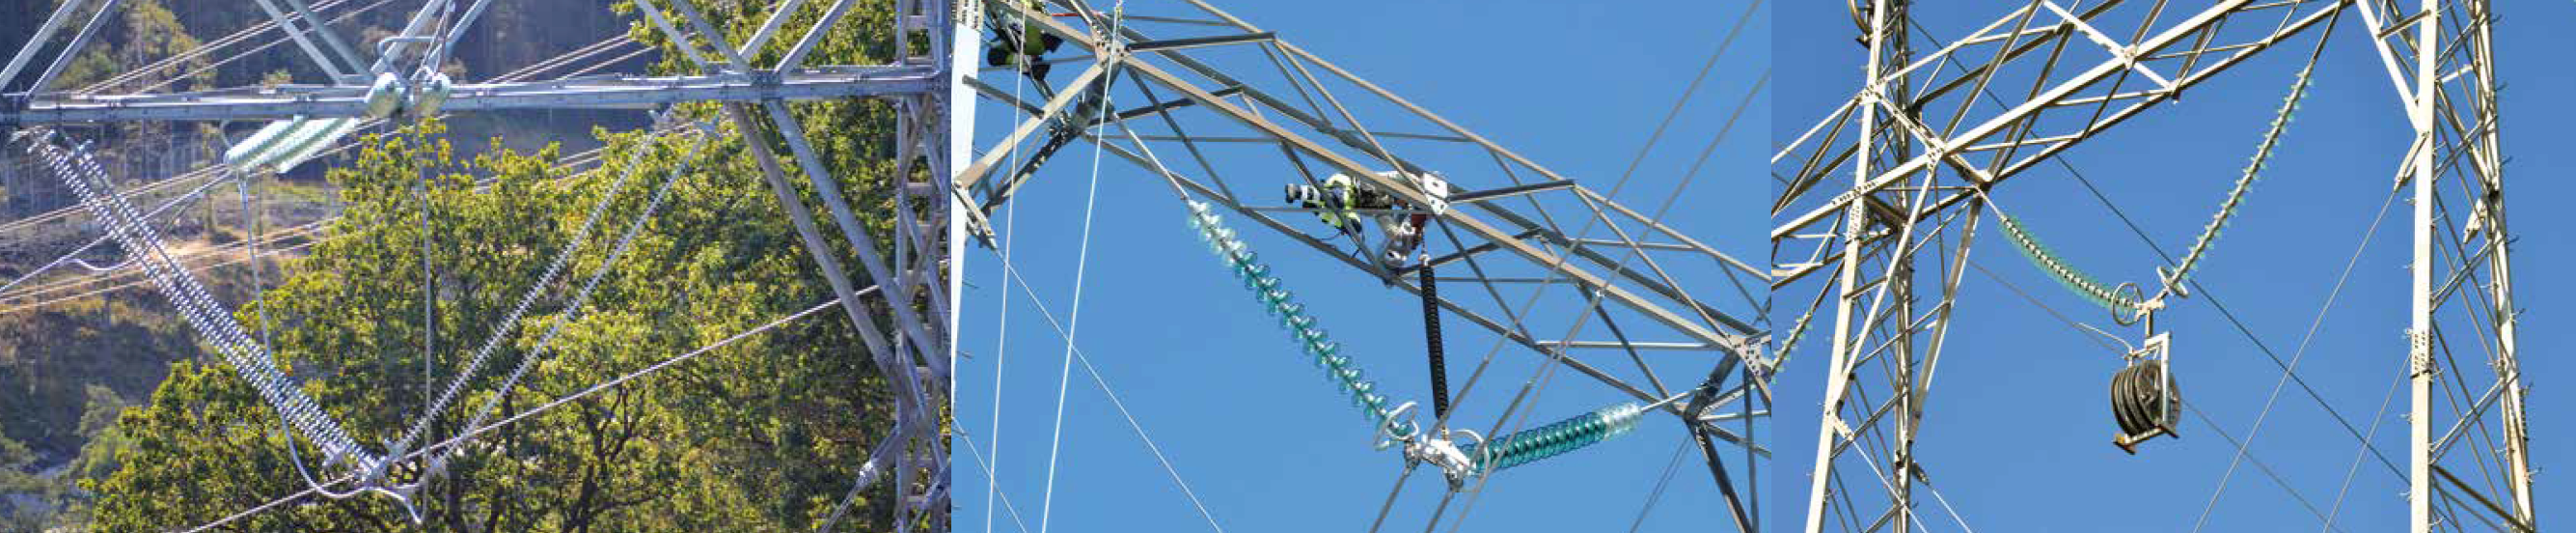 Glass insulators dominate transmission lines in Norway such as for new triplex 420 kV line (top) but composite types have found selective applications, such as during line upgrades (center & bottom).